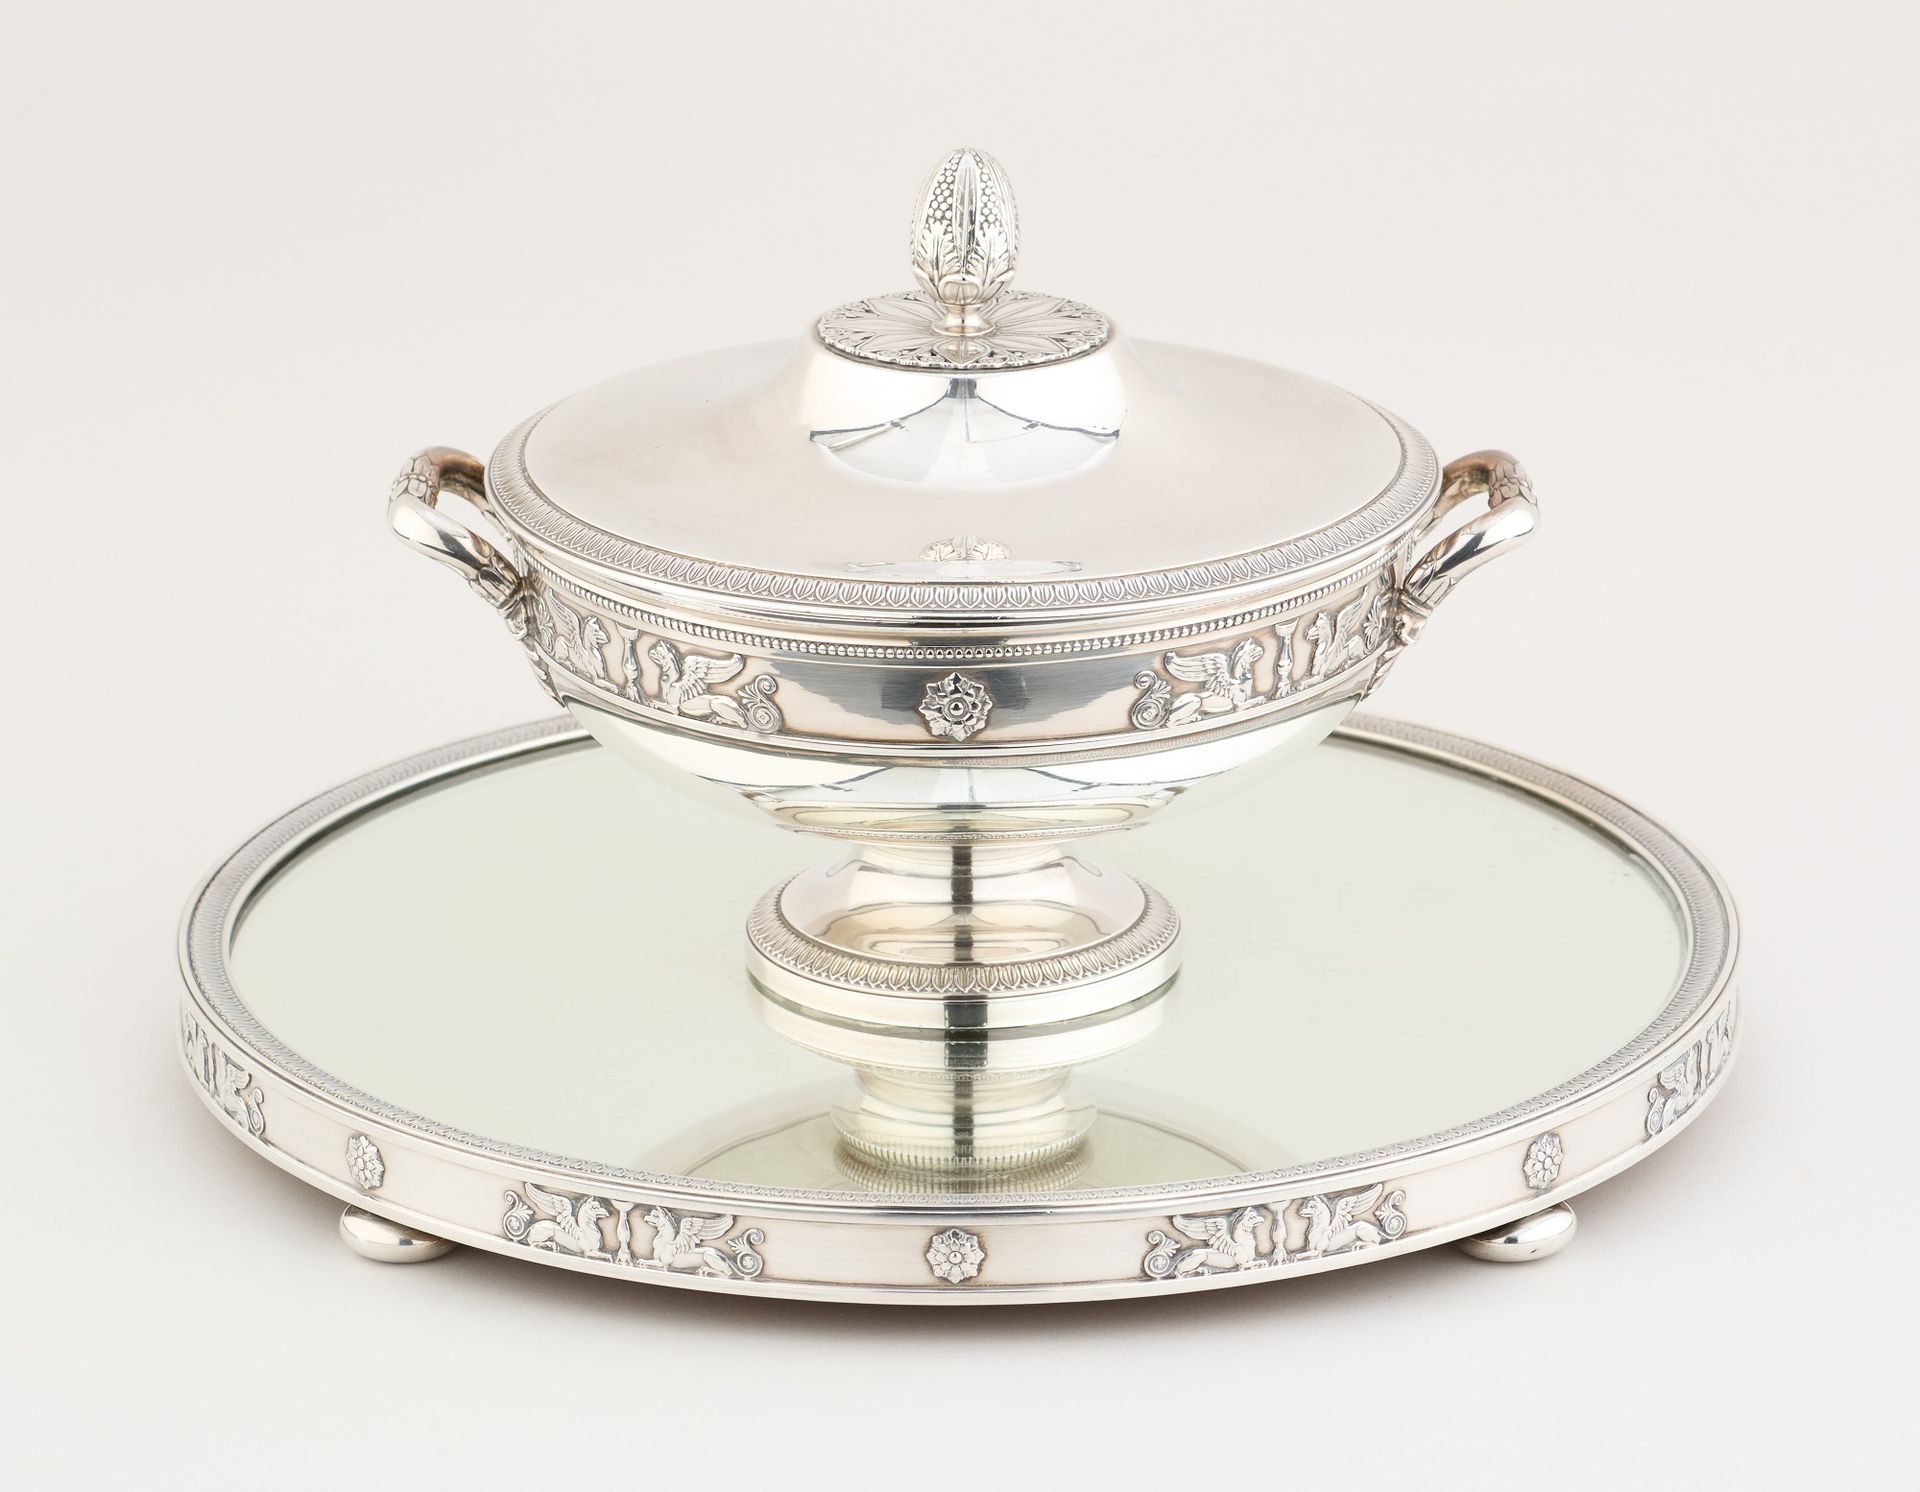 ODIOT, Paris. Silverware: Centerpiece consisting of a covered tureen with pine c&hellip;